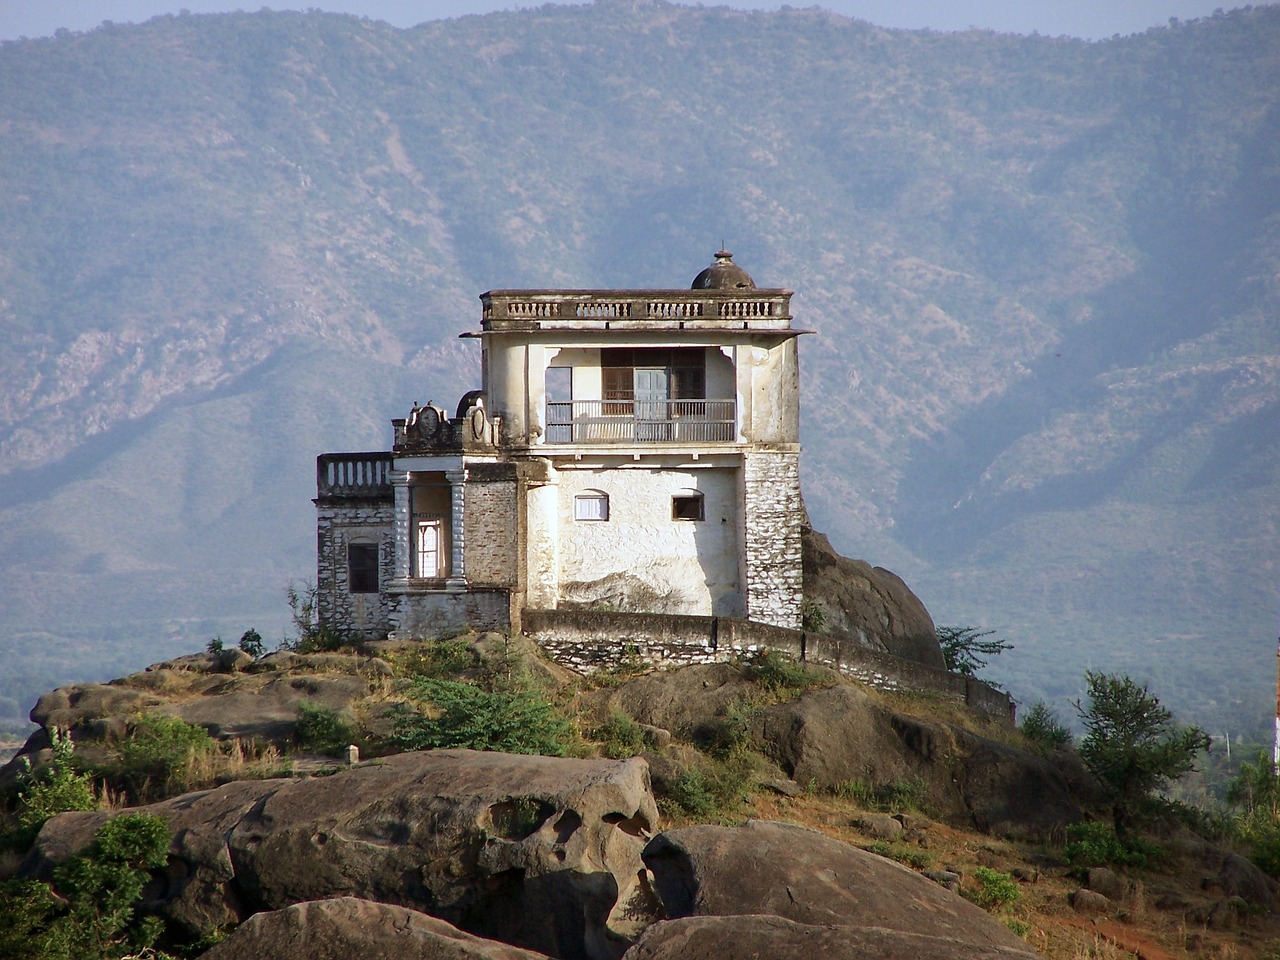 4-Day Adventure in Mount Abu